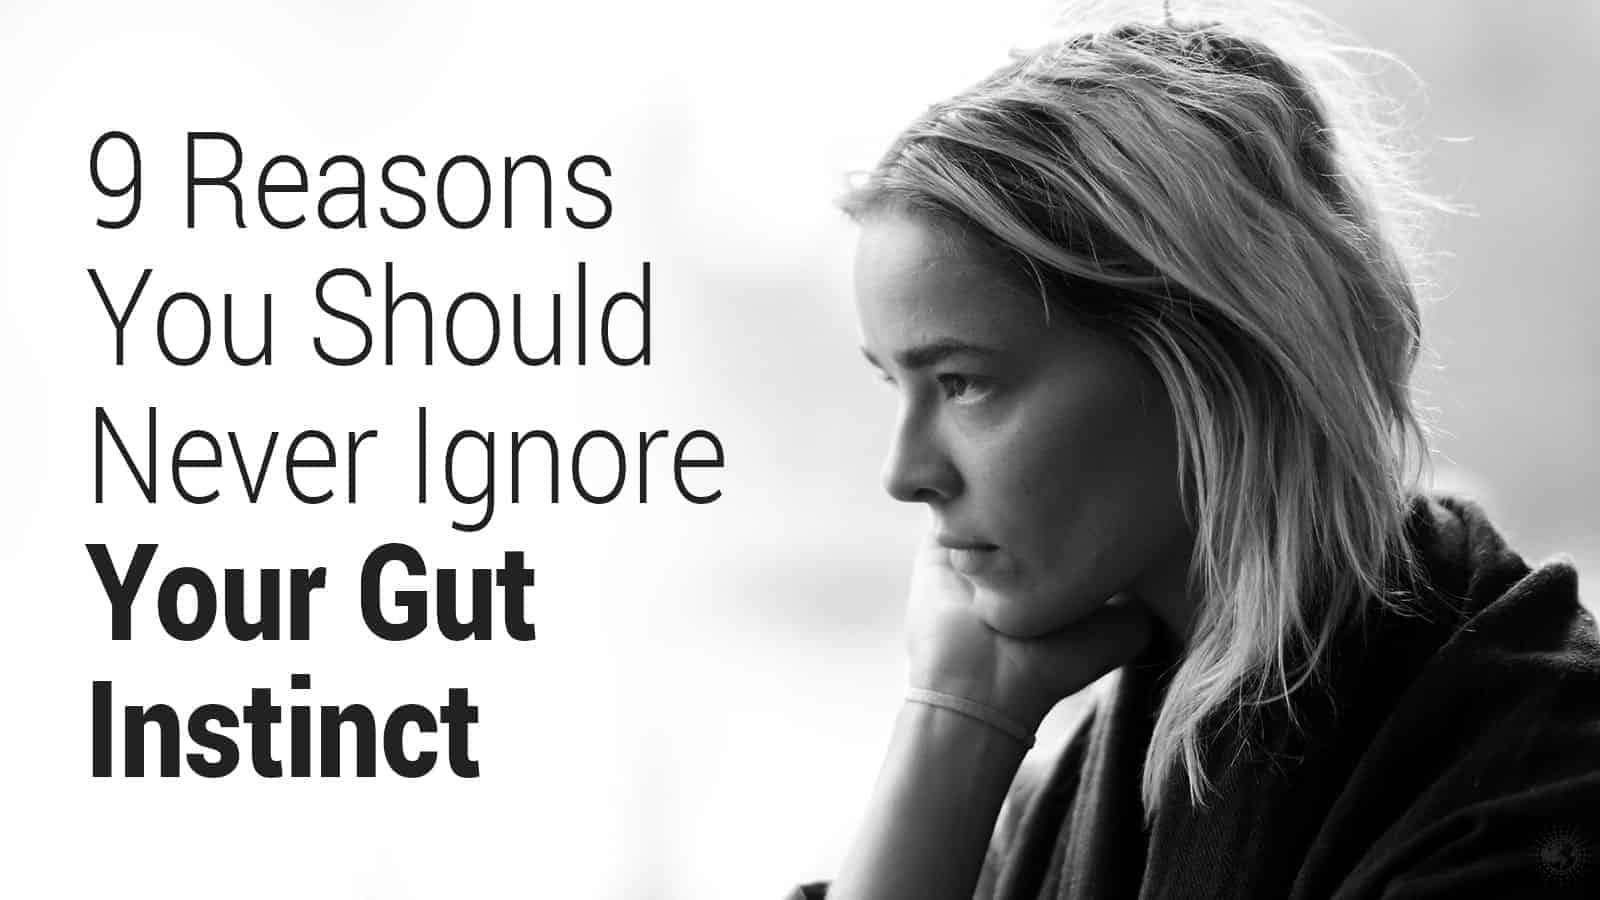 9 Reasons You Should Never Ignore Your Gut Instinct